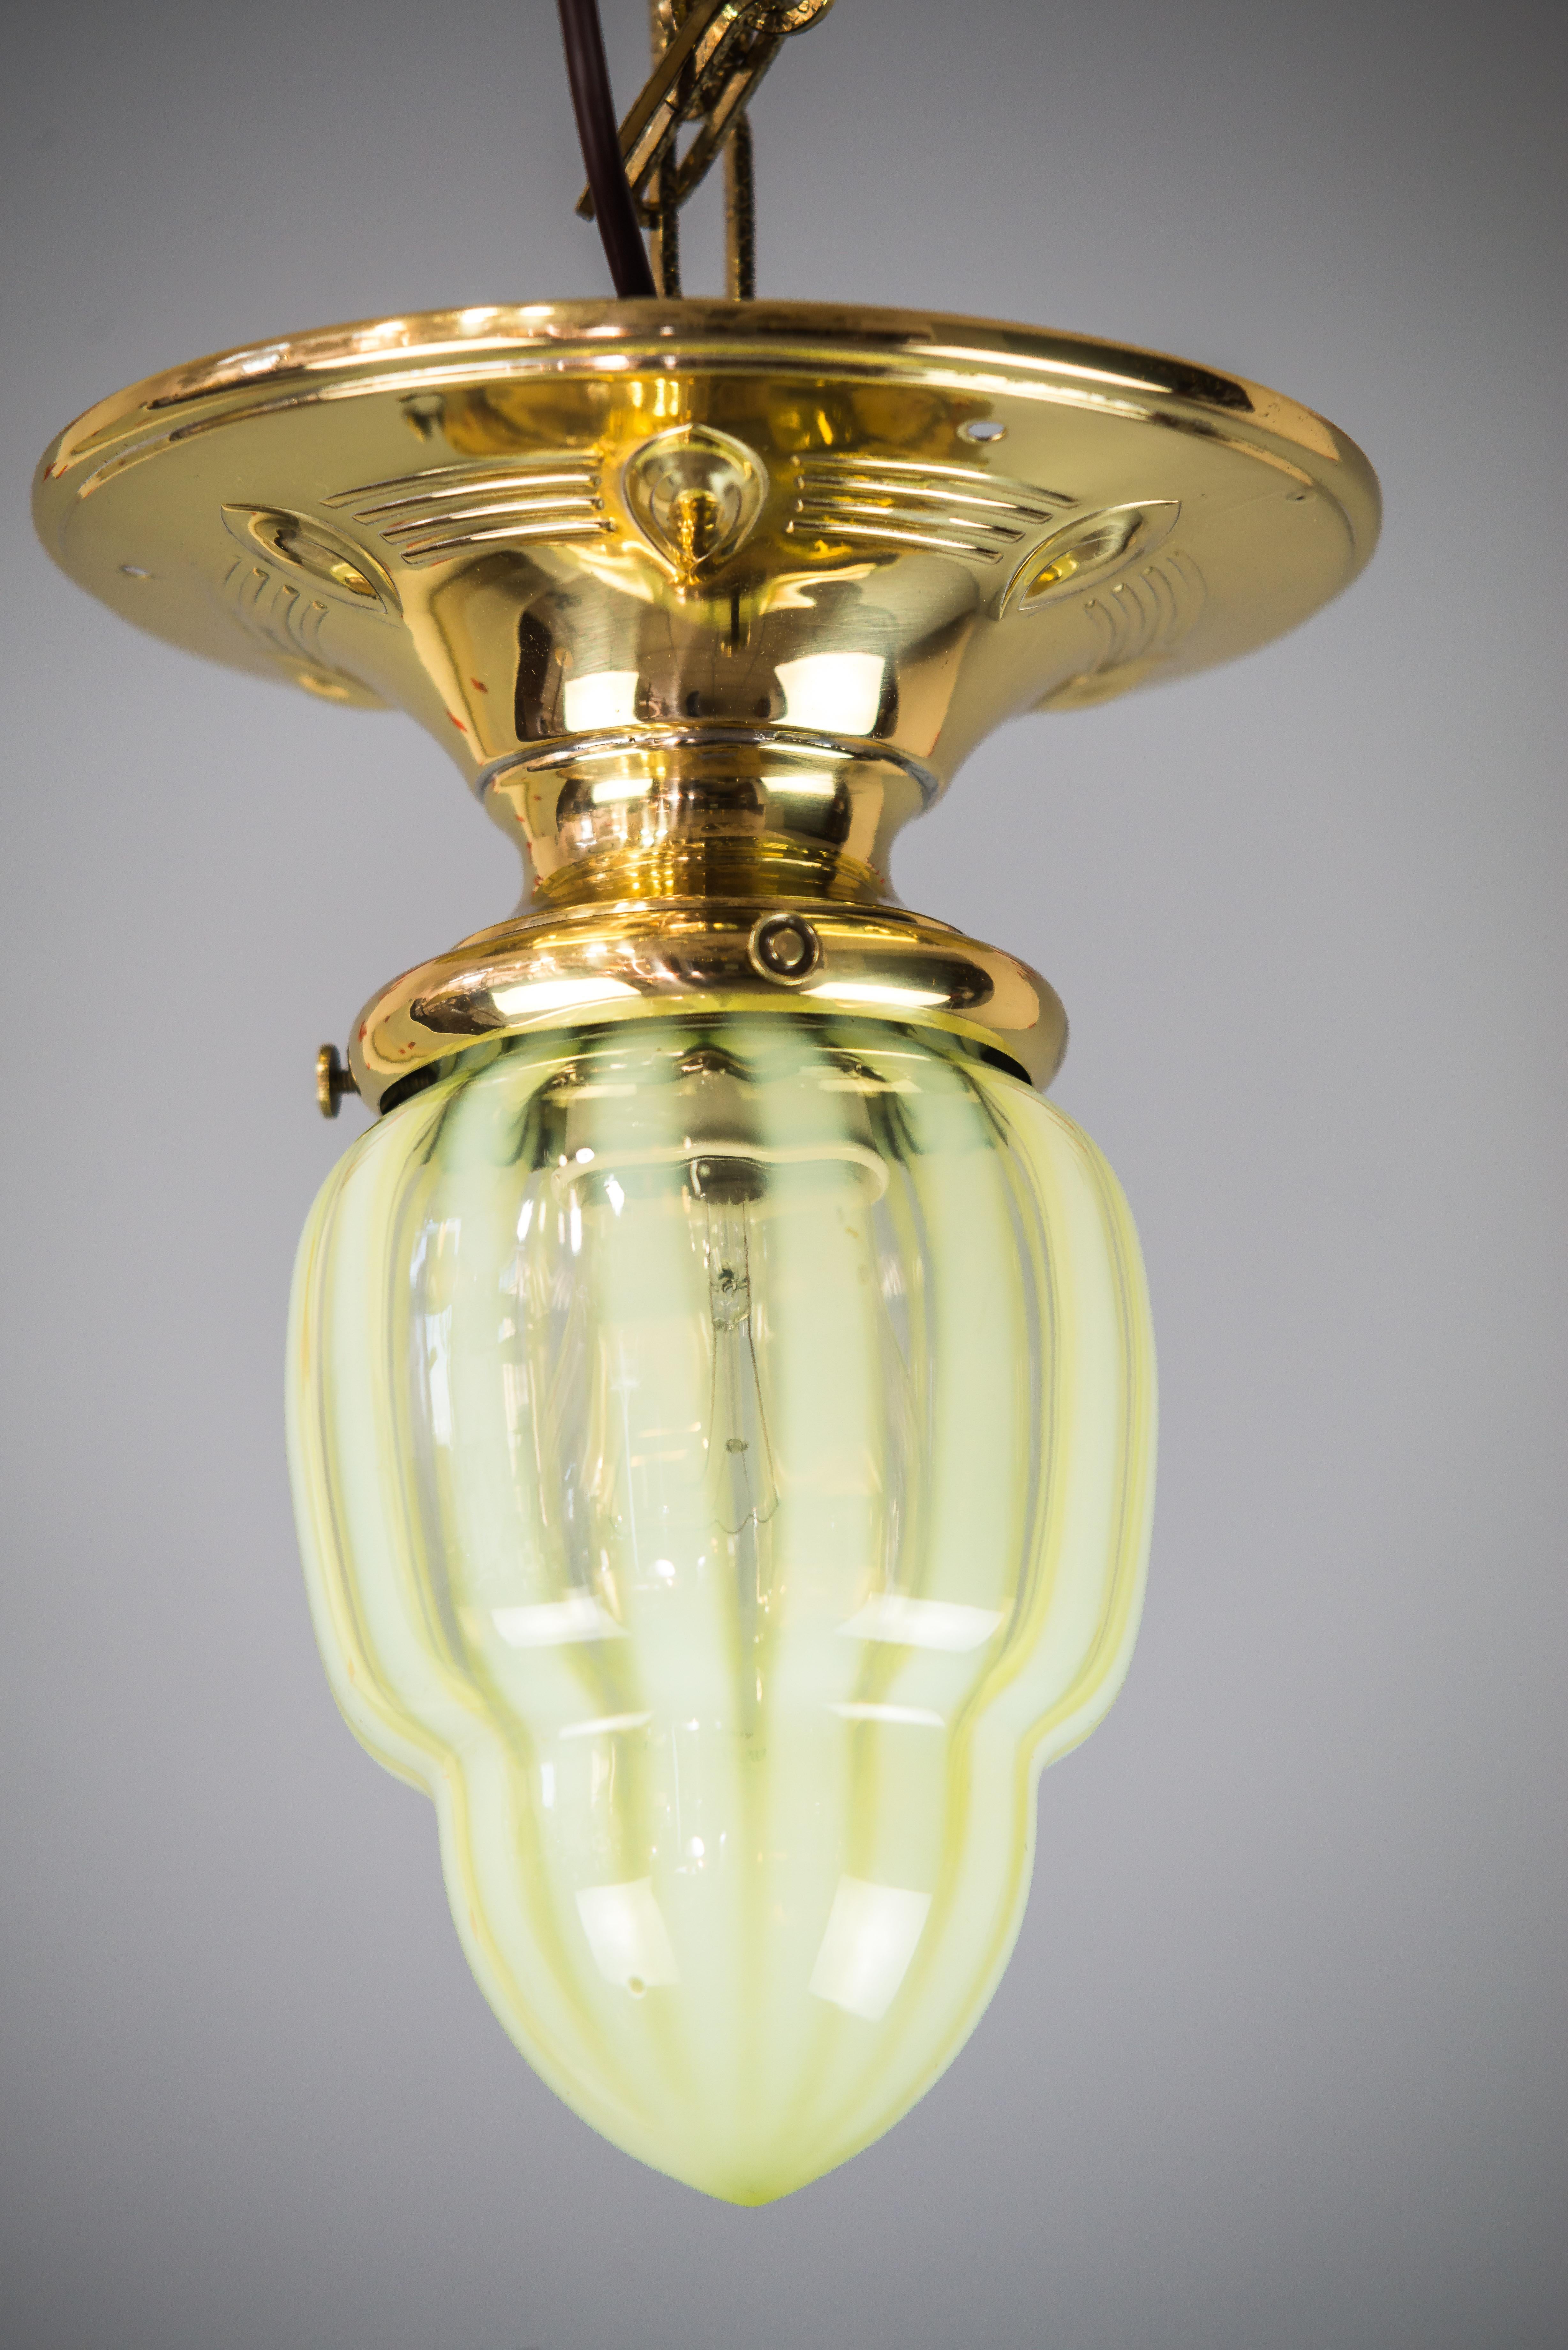 Small Jugendstil ceiling lamp with original yellow/green opaline glass
Polished and stove enameled.